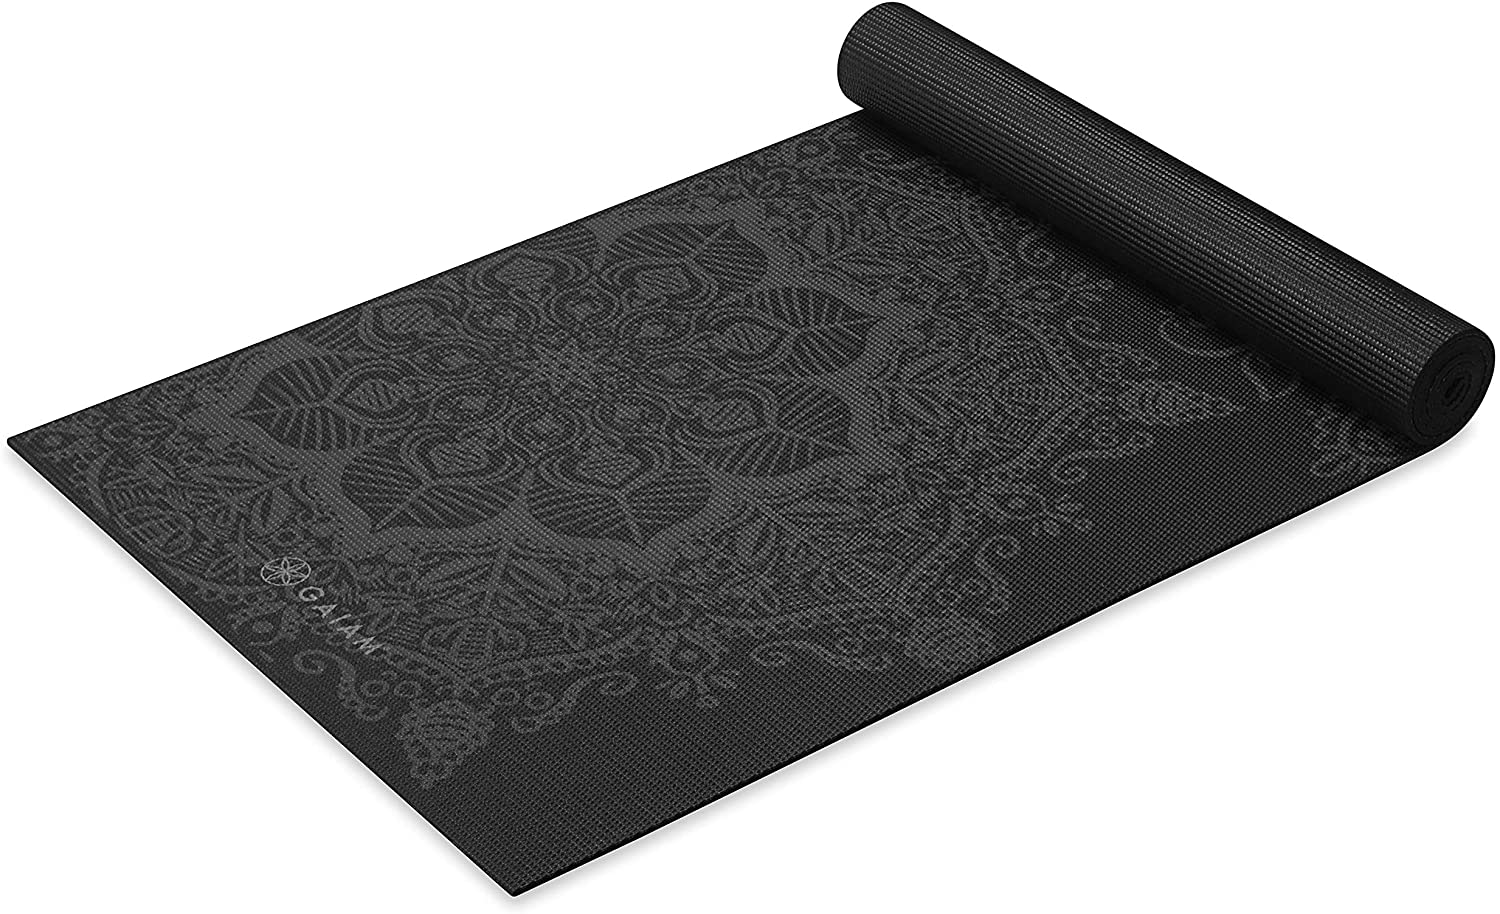 Photo 1 of Gaiam Yoga Mat  Premium 6mm Print Extra Thick Non Slip Exercise  Fitness Mat for All Types of Yoga Pilates  Floor Workouts 68L x 24W x 6mm Thick